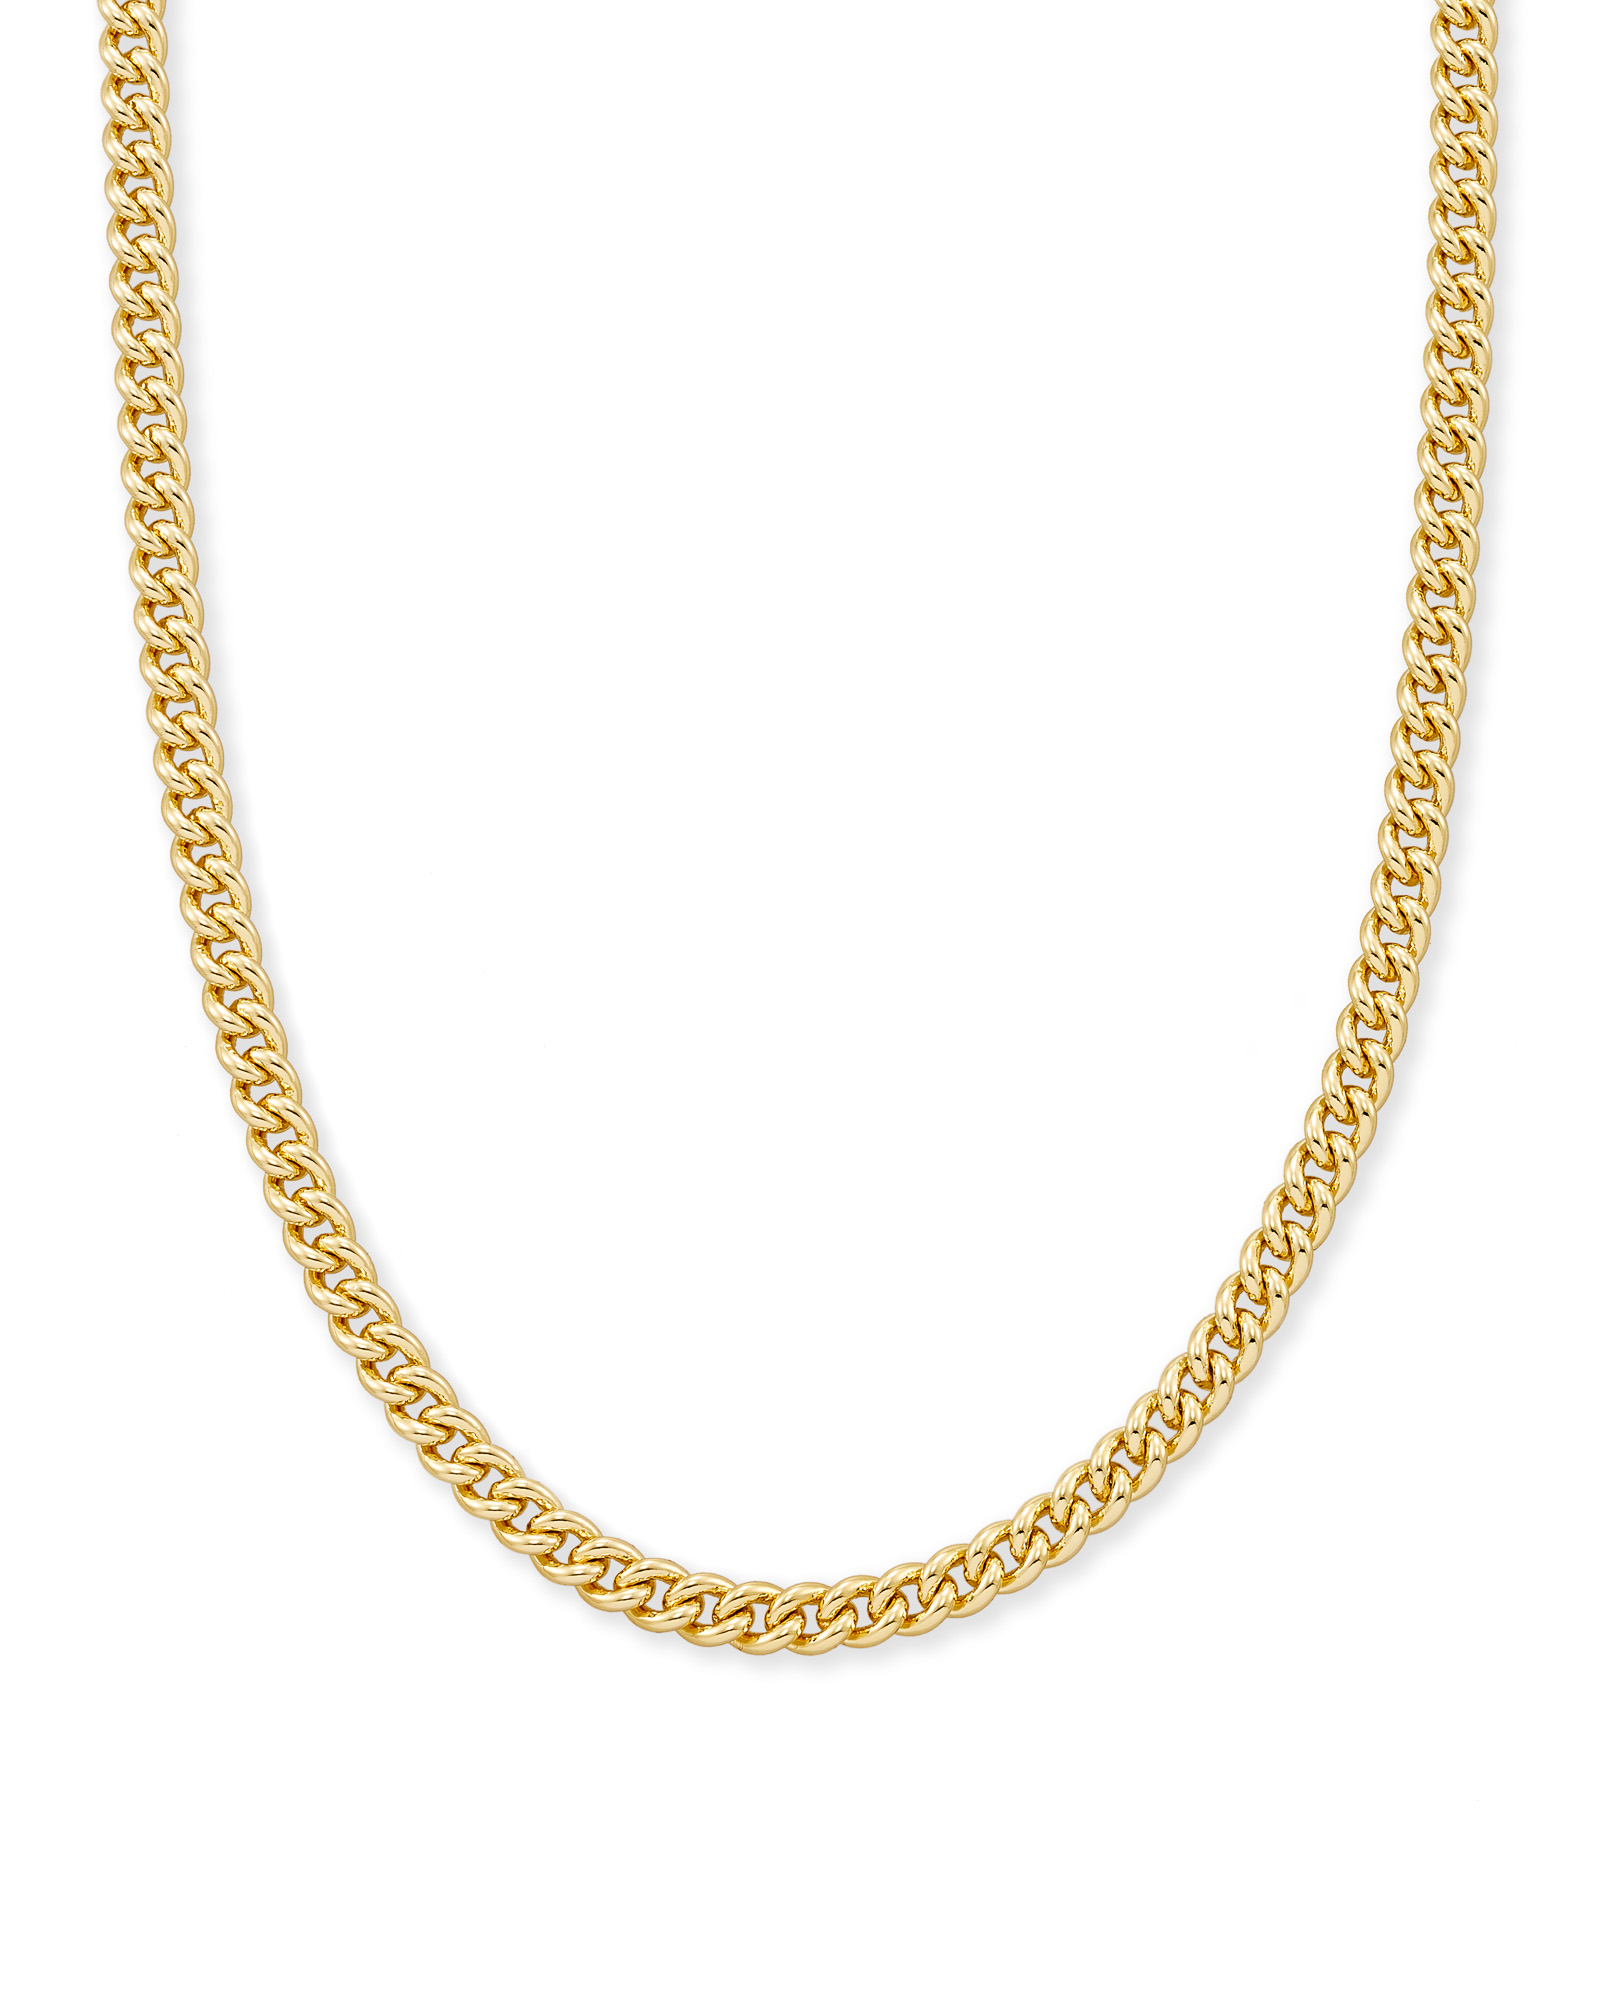 Ace Chain Necklace in Gold Kendra Scott